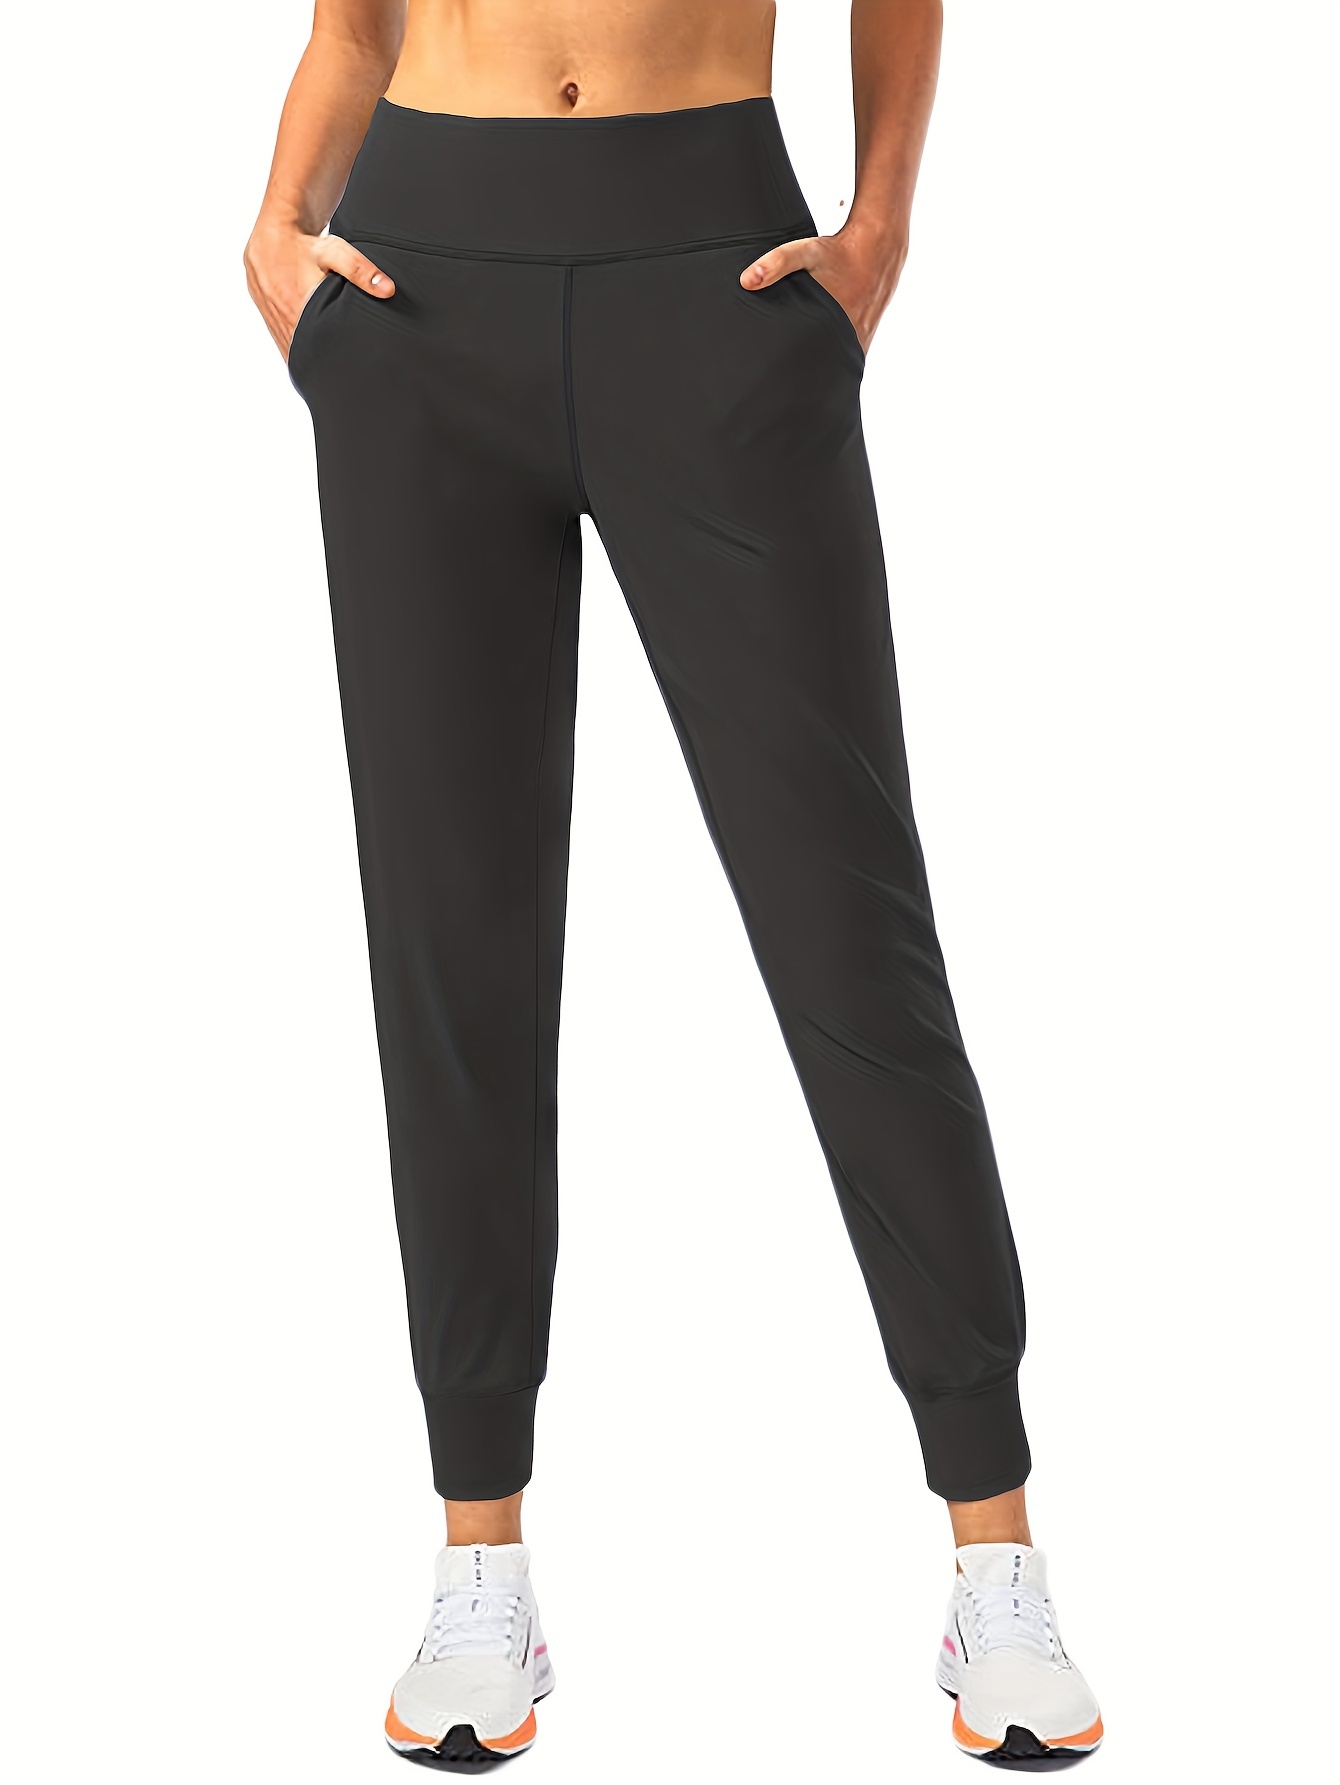 High Waist Yoga Pants with Zipper Pocket - Women's Activewear for Running,  Cycling, and Gym Workouts